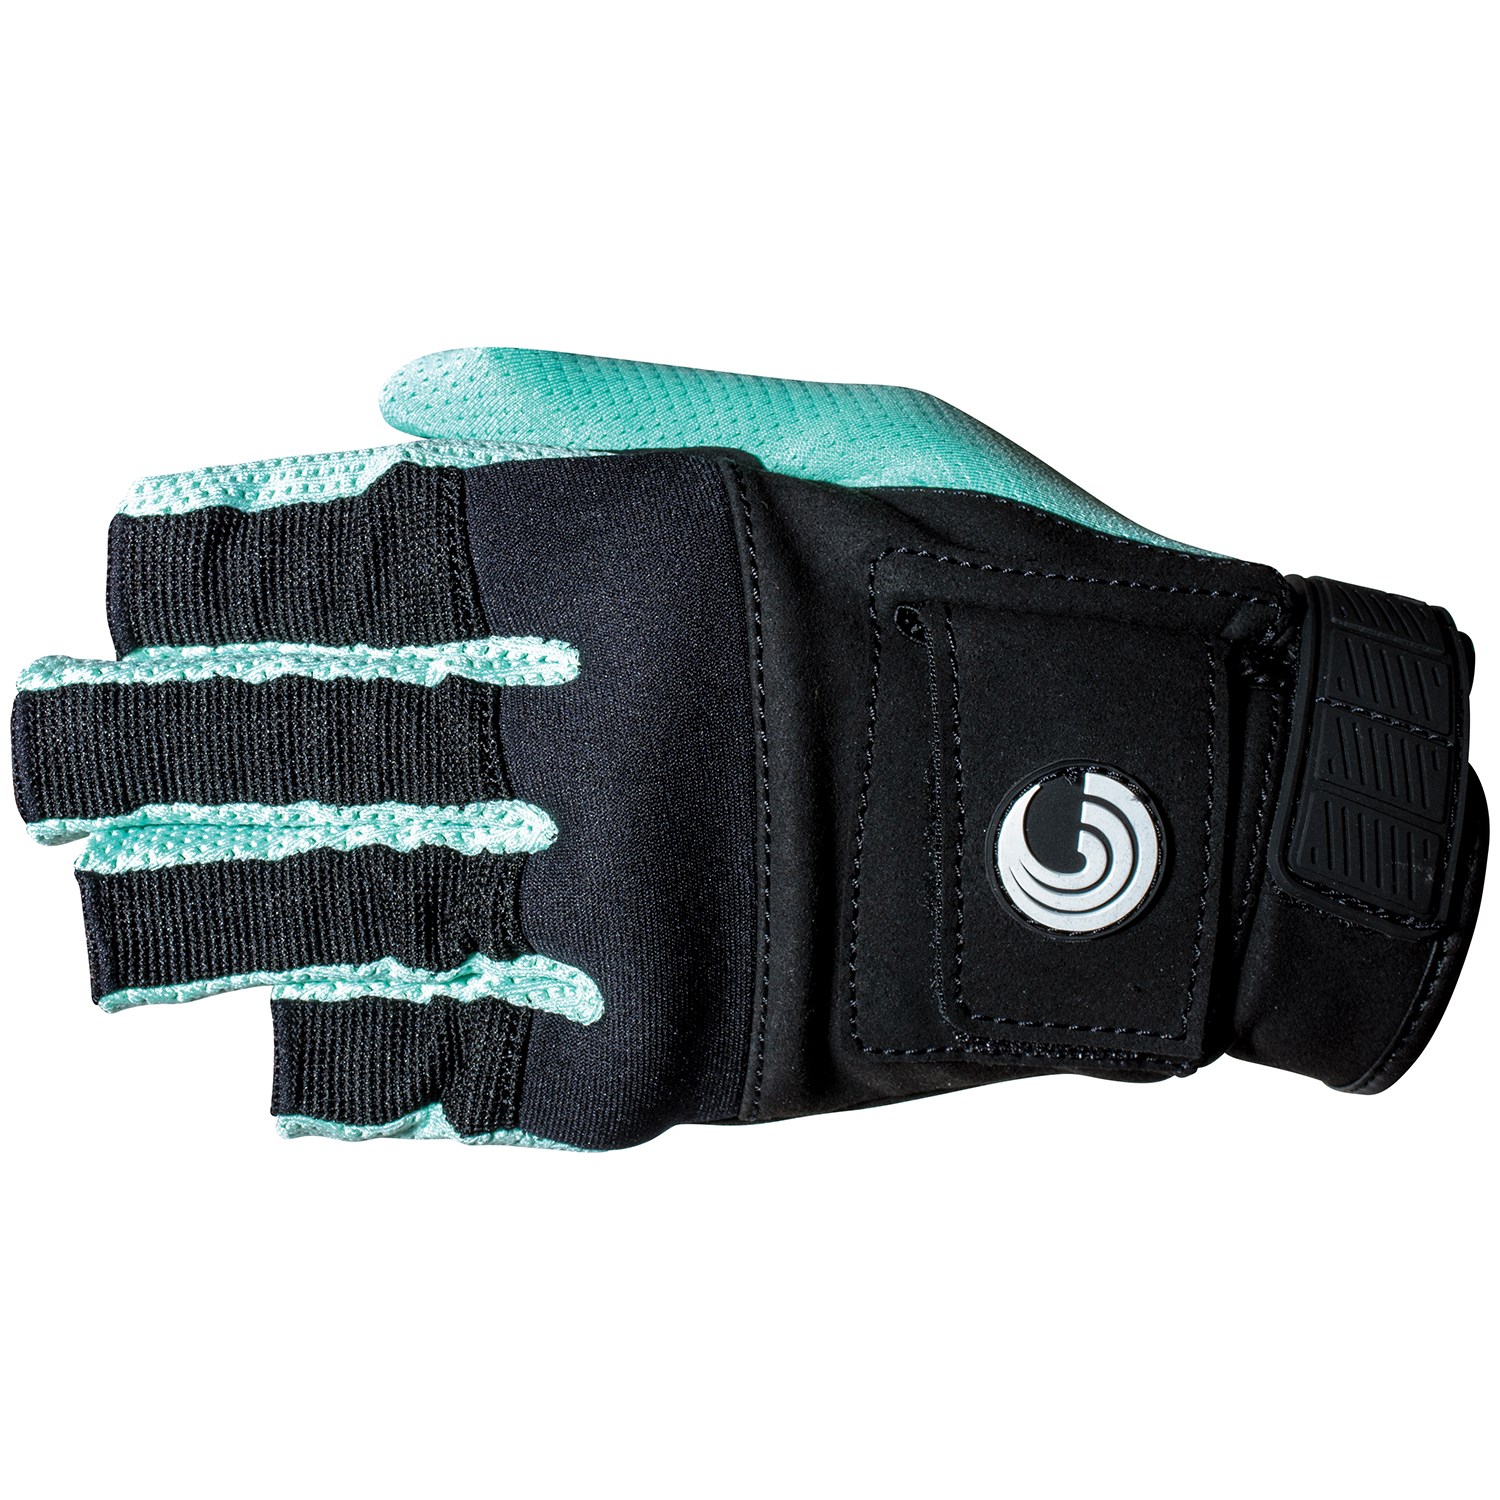 Connelly Womens Waterski Gloves